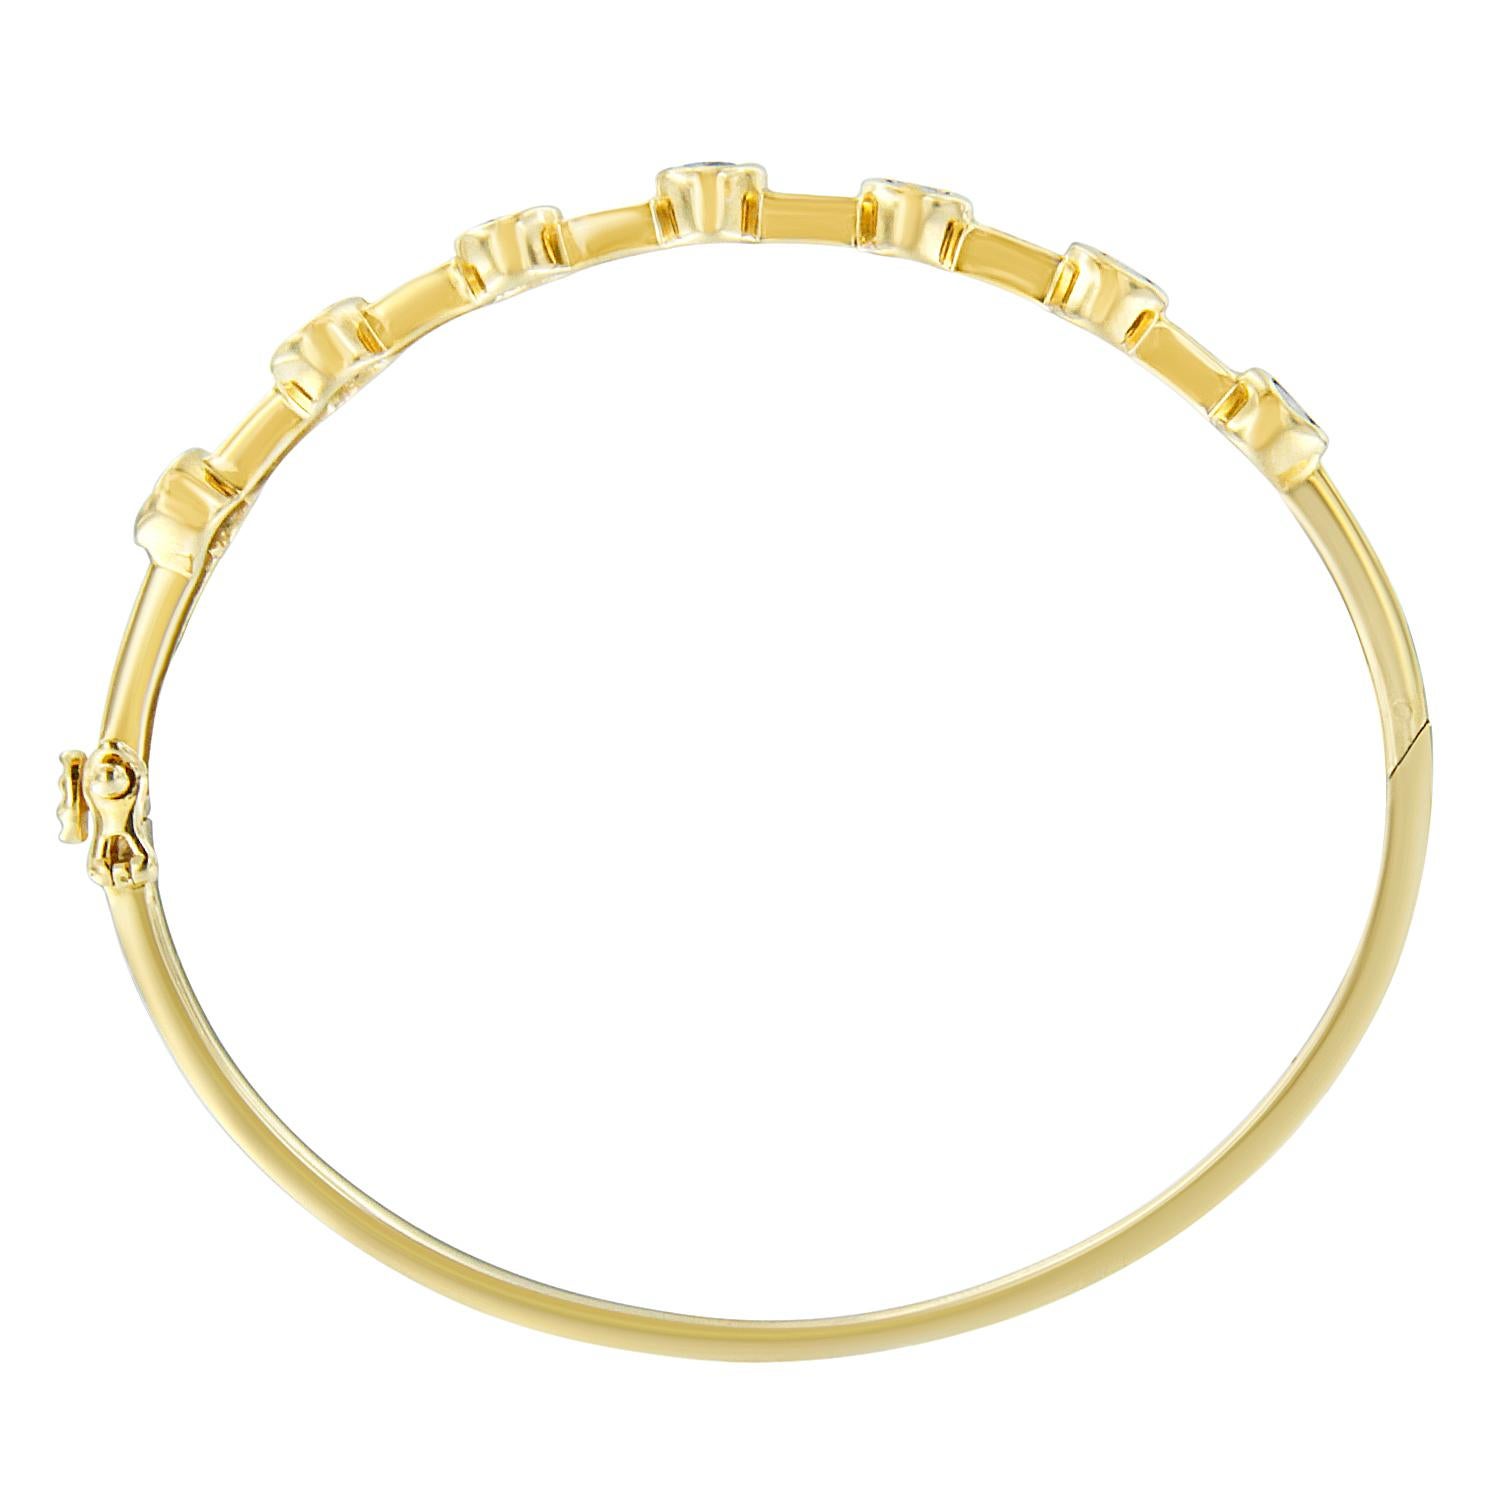 This elegant diamond and gemstone bangle invokes the classic feel of art deco. The 14k yellow gold bracelet features a series of oval tanzanite flanked by pairs of round diamonds. The rich royal blue gemstone is found in only one place on Earth.